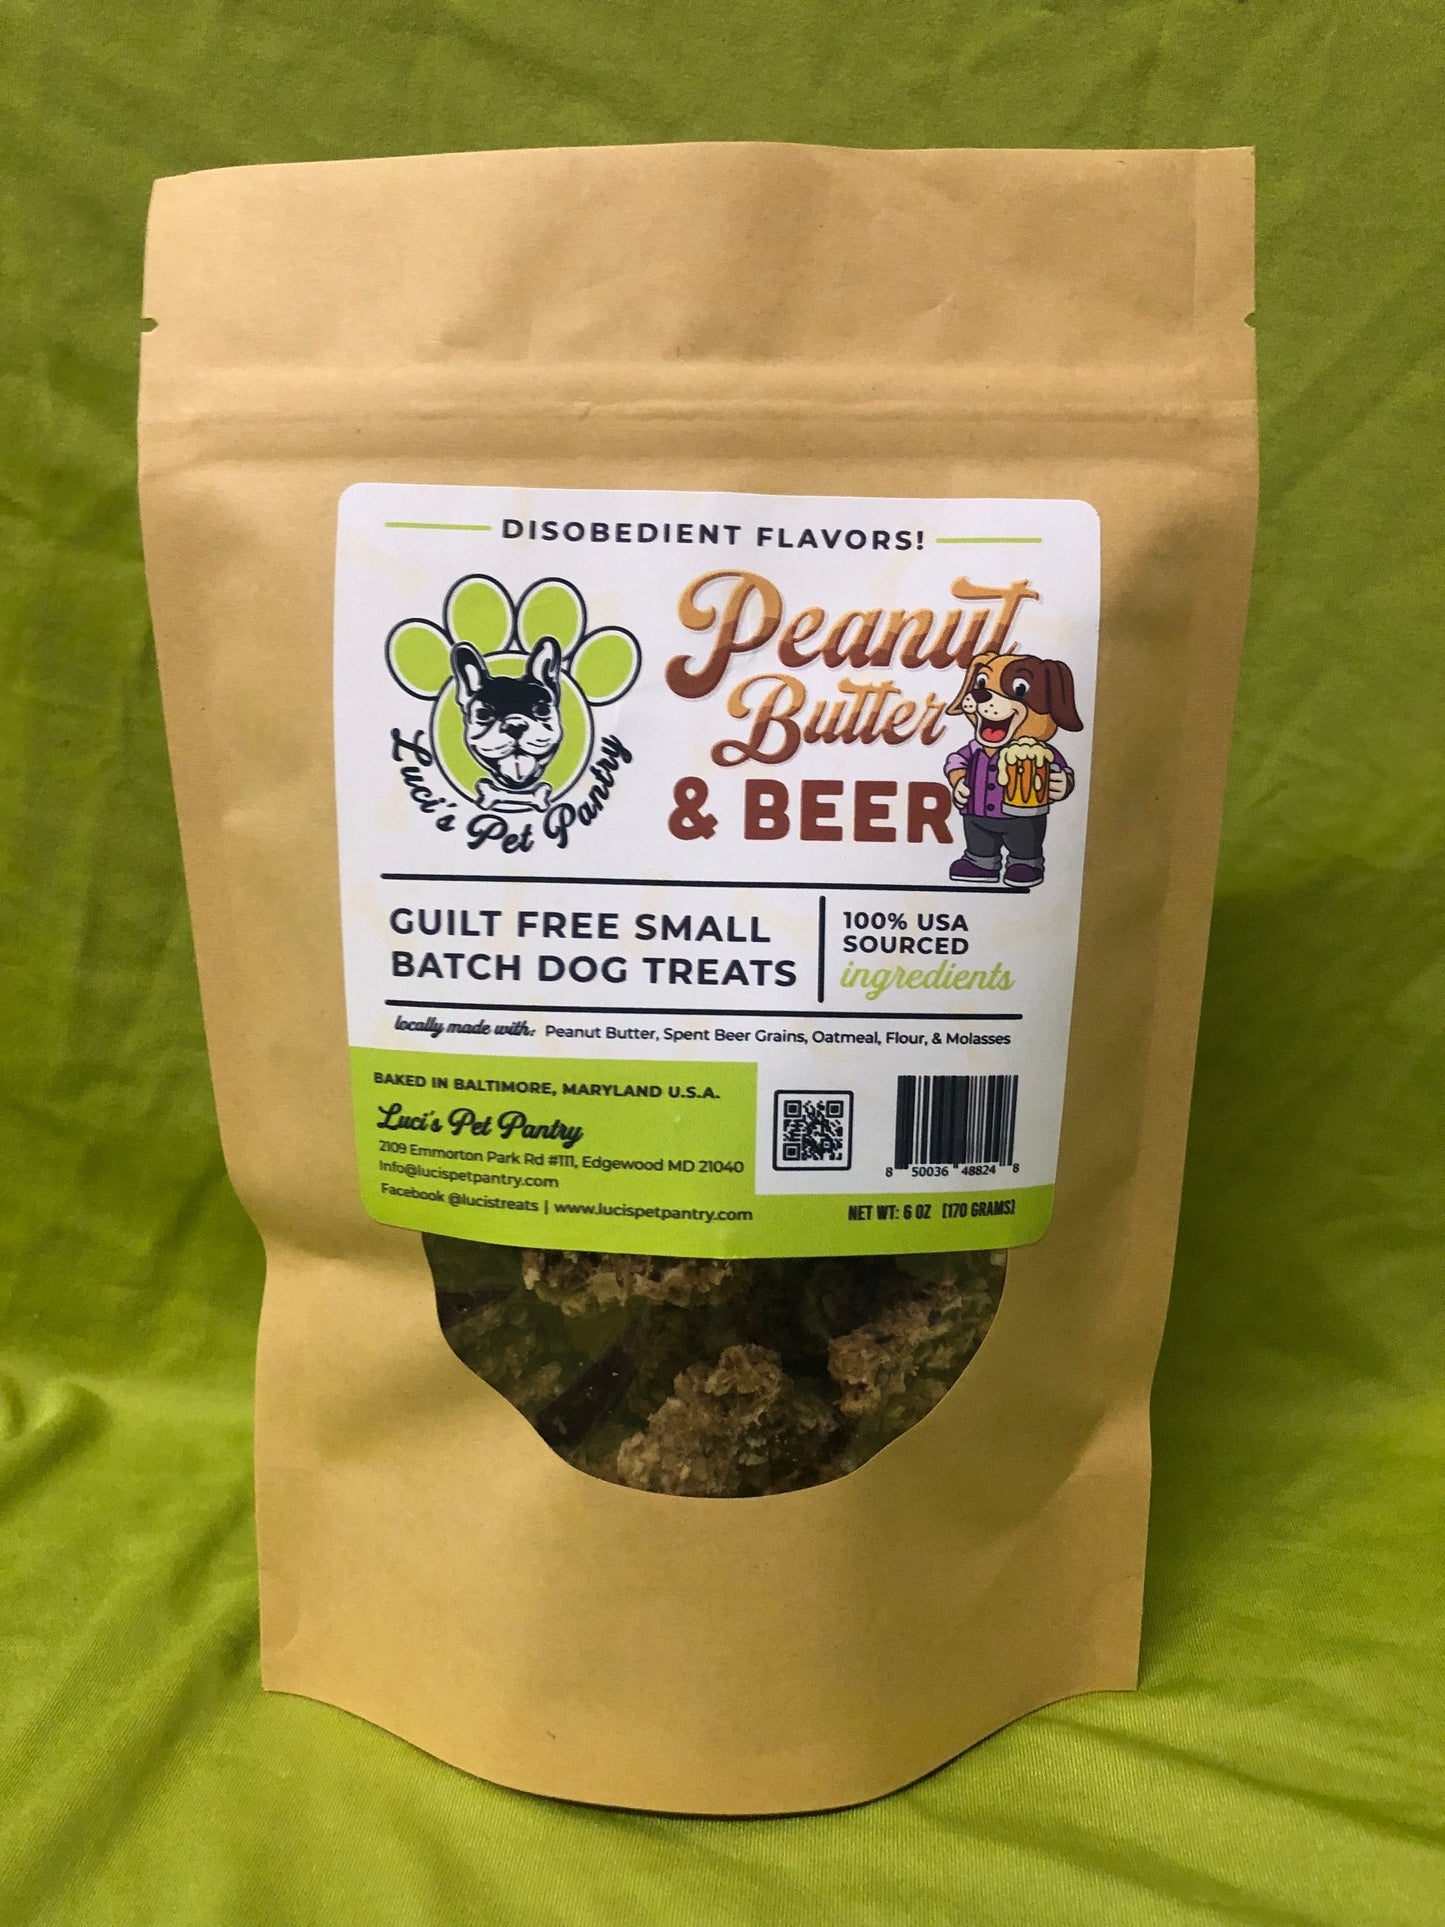 Bacon & Beer - All Natural Dog & Puppy Treats - Disobedient Biscuits! 6 oz. Pouch